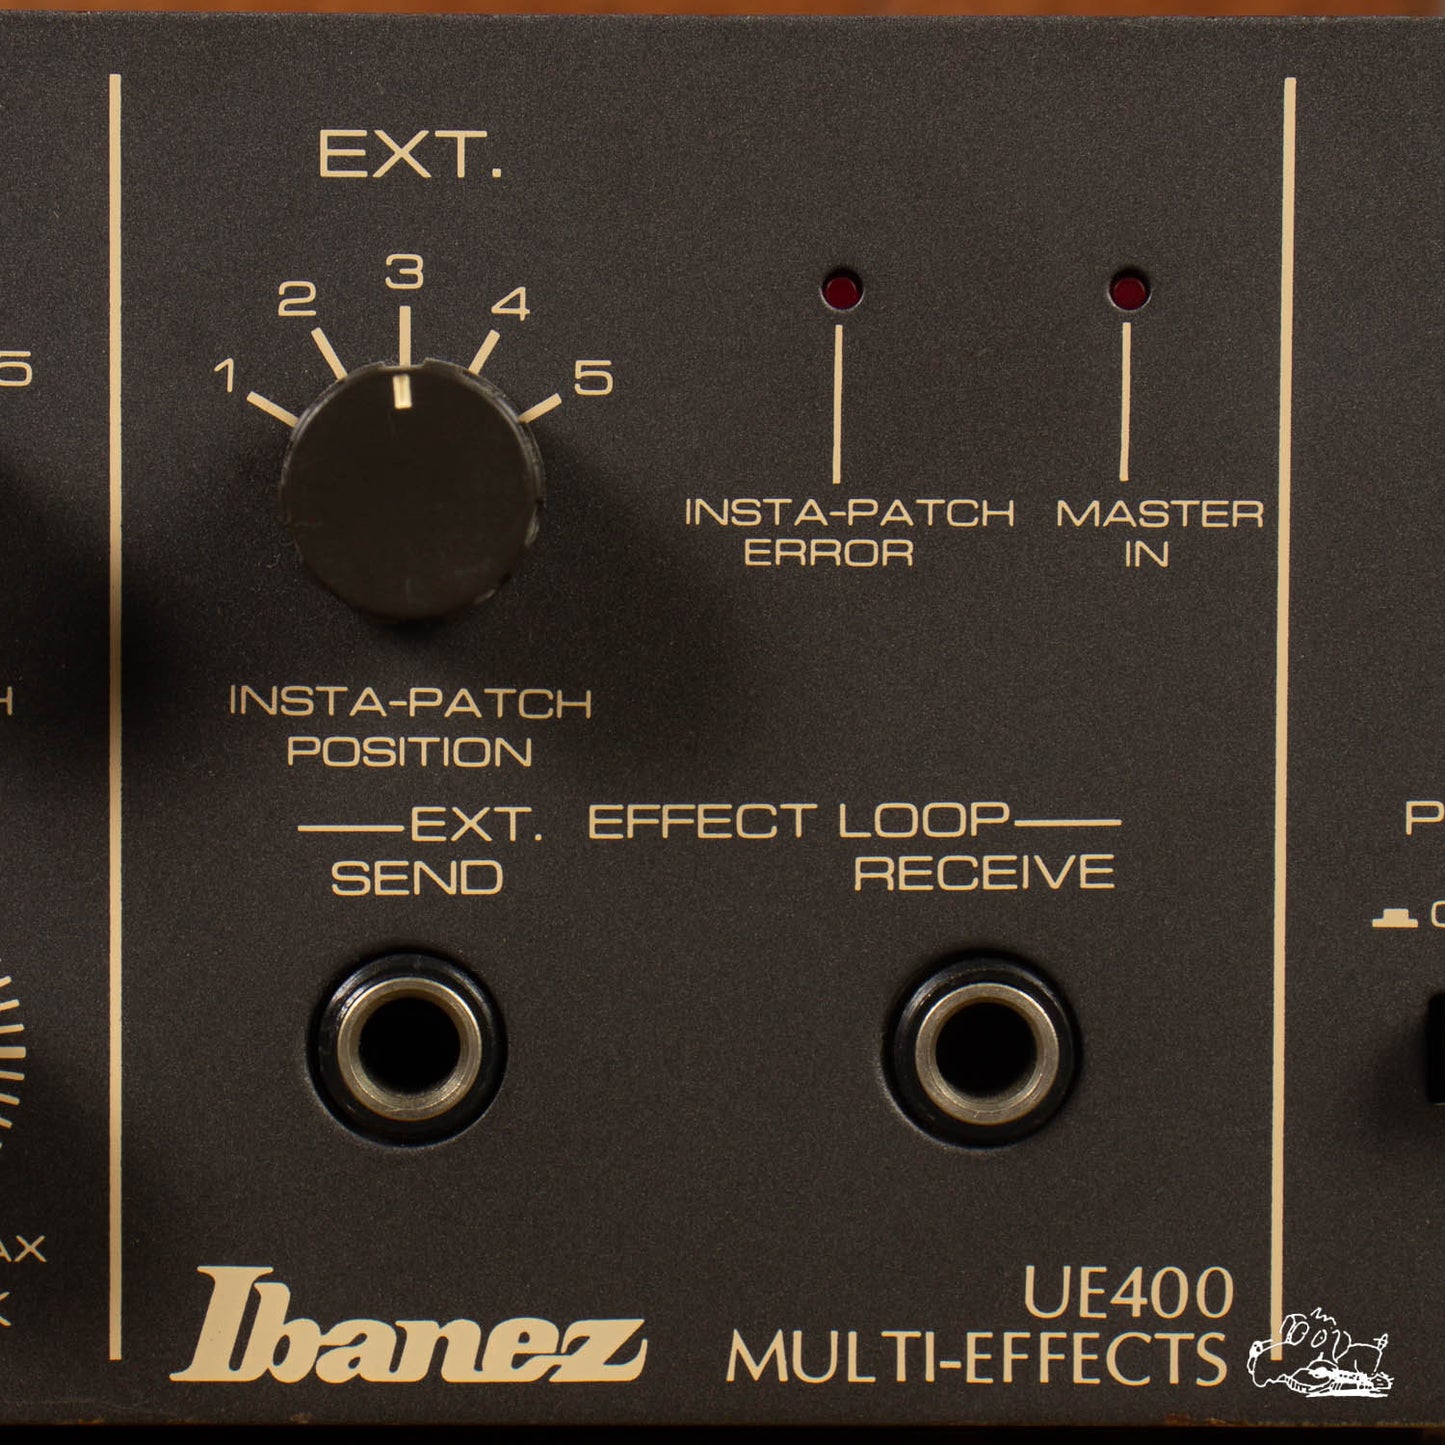 Ibanez Multi-Effects - UE400 - Interface & Foot Controller